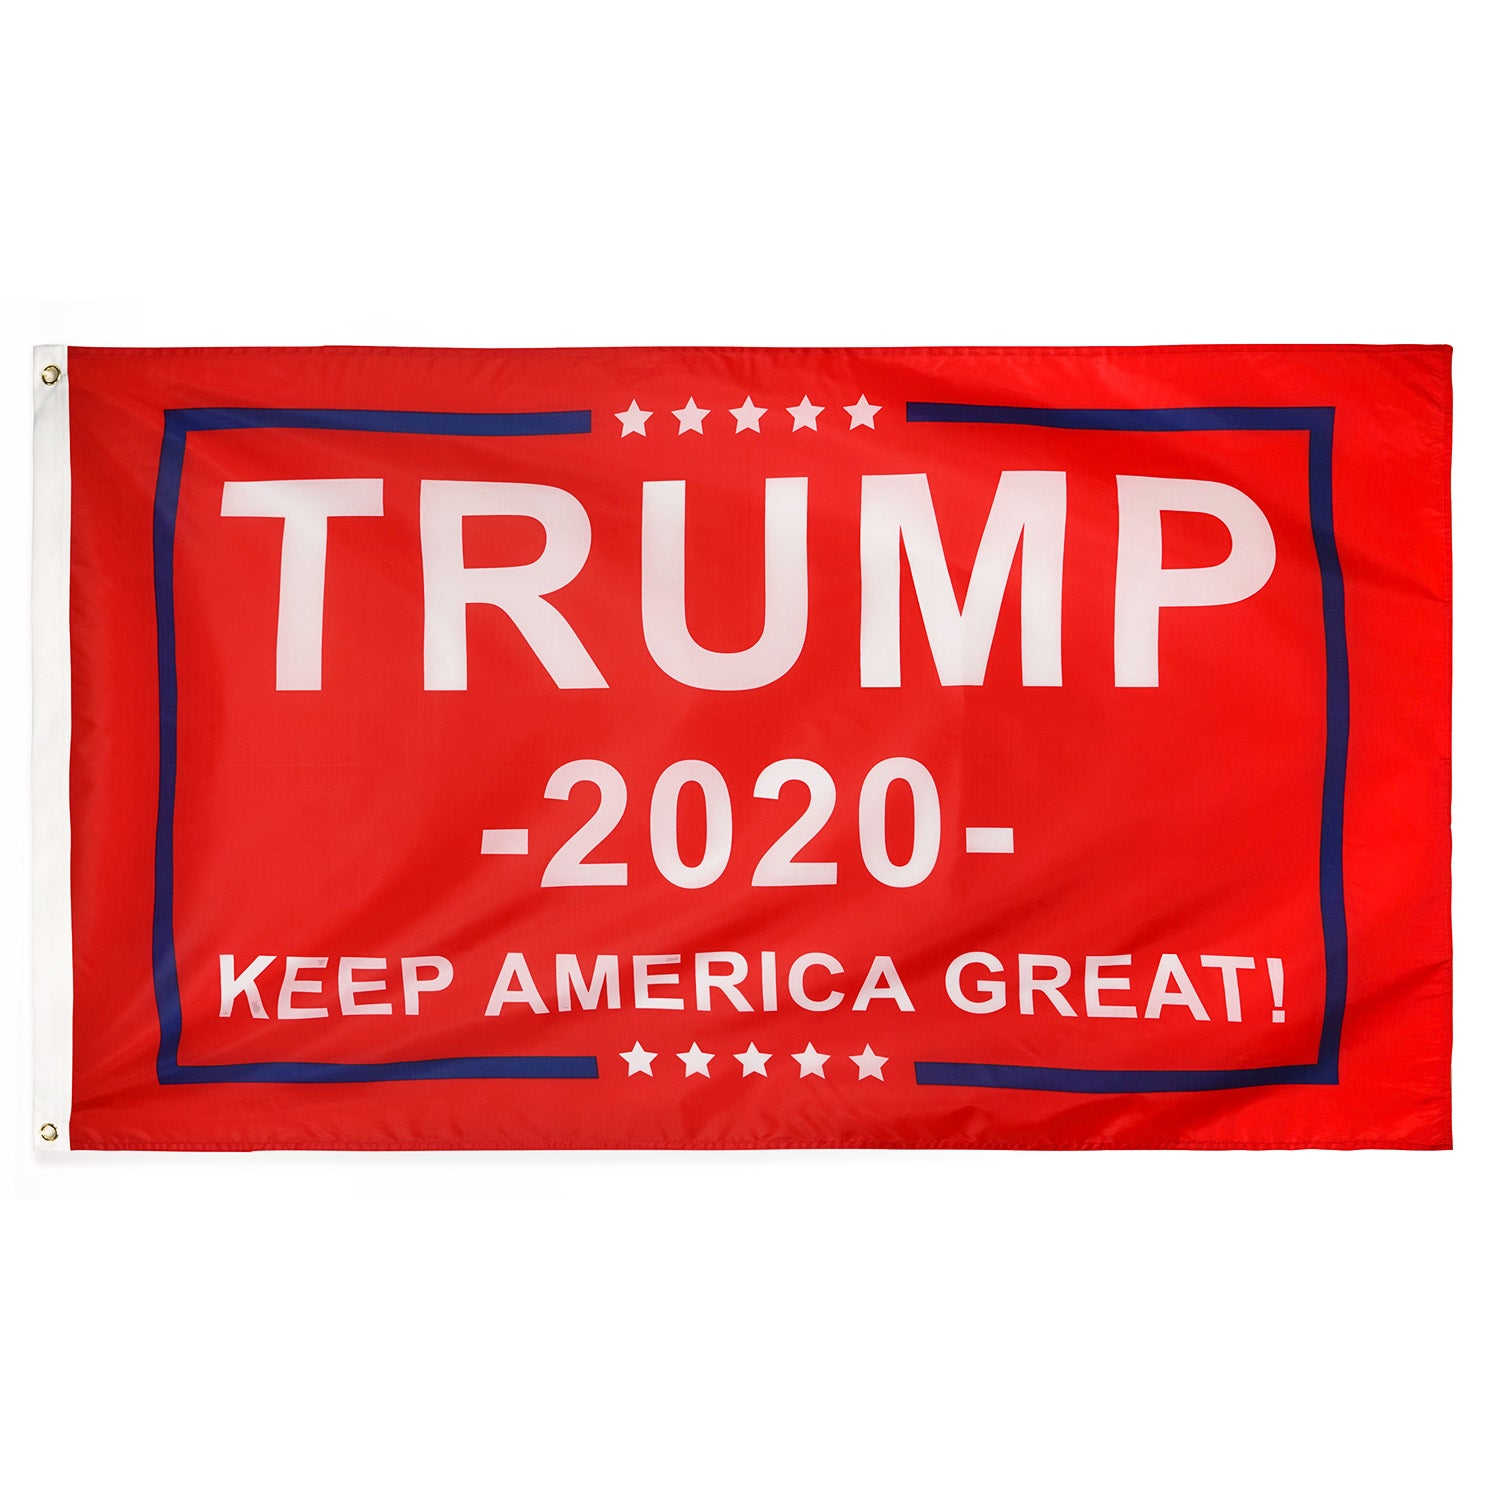 FREE RED Trump 2020 Flag - Keep America Great! -- 3 ft x 5 ft